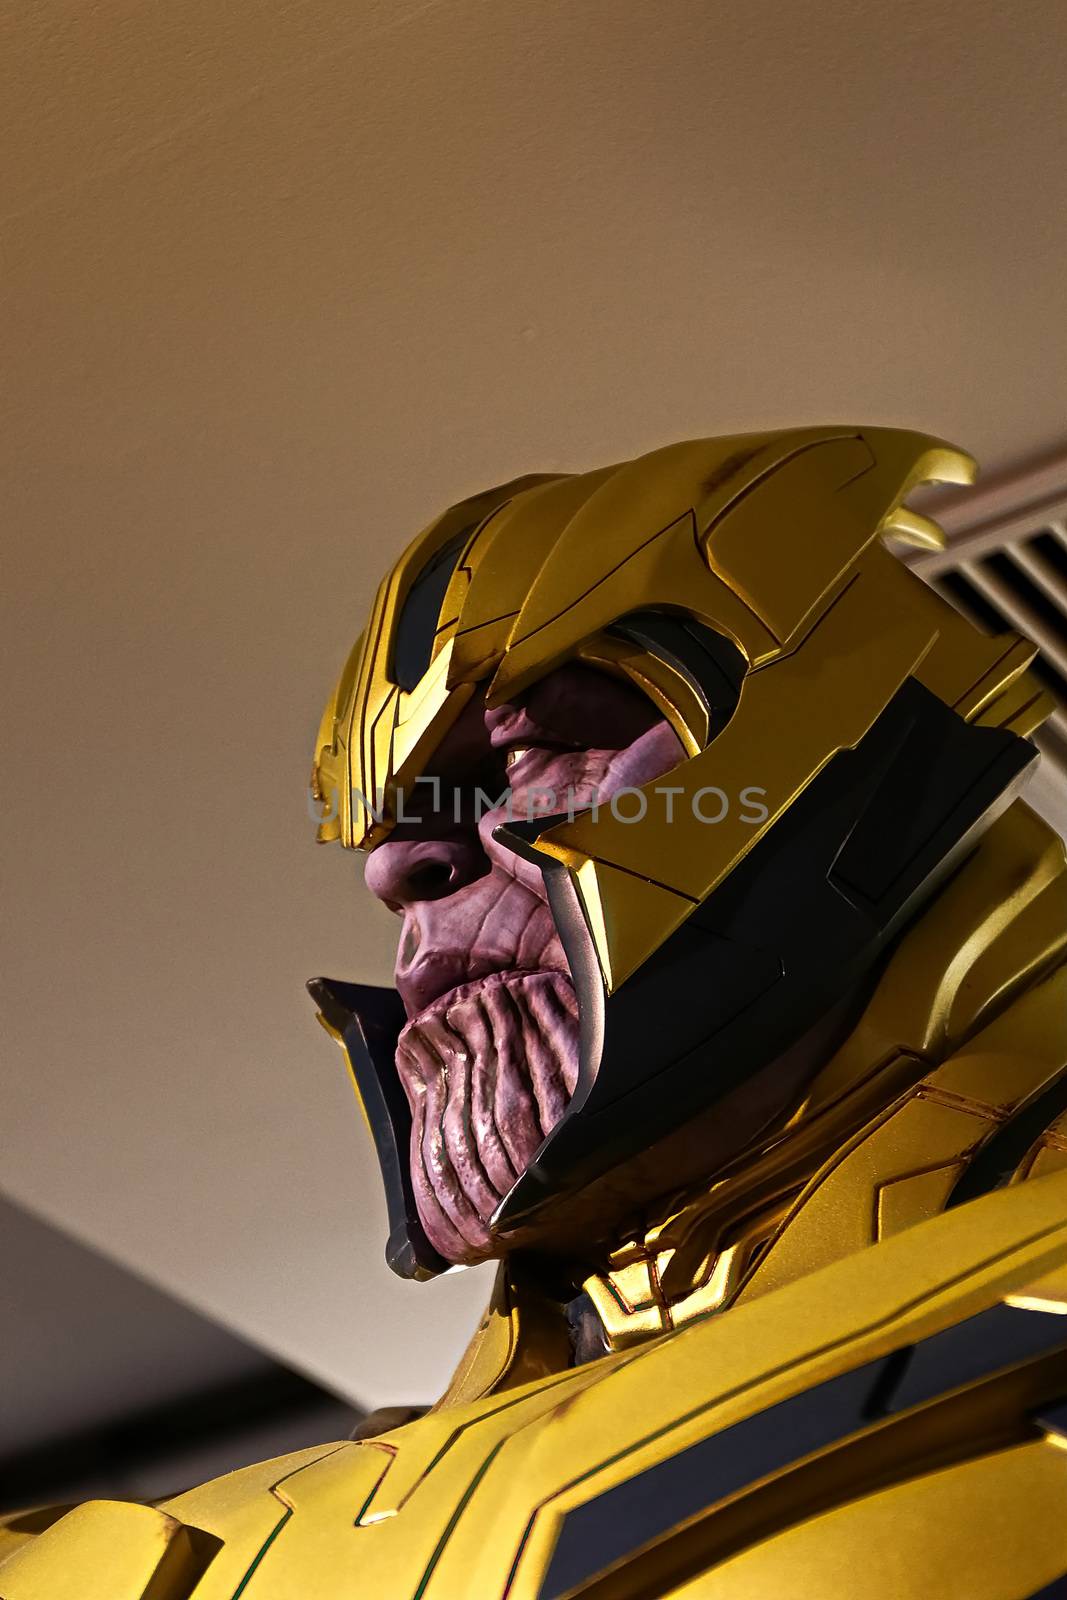 Thanos full armor suit action figure show for promote Avengers endgame movie by USA-TARO